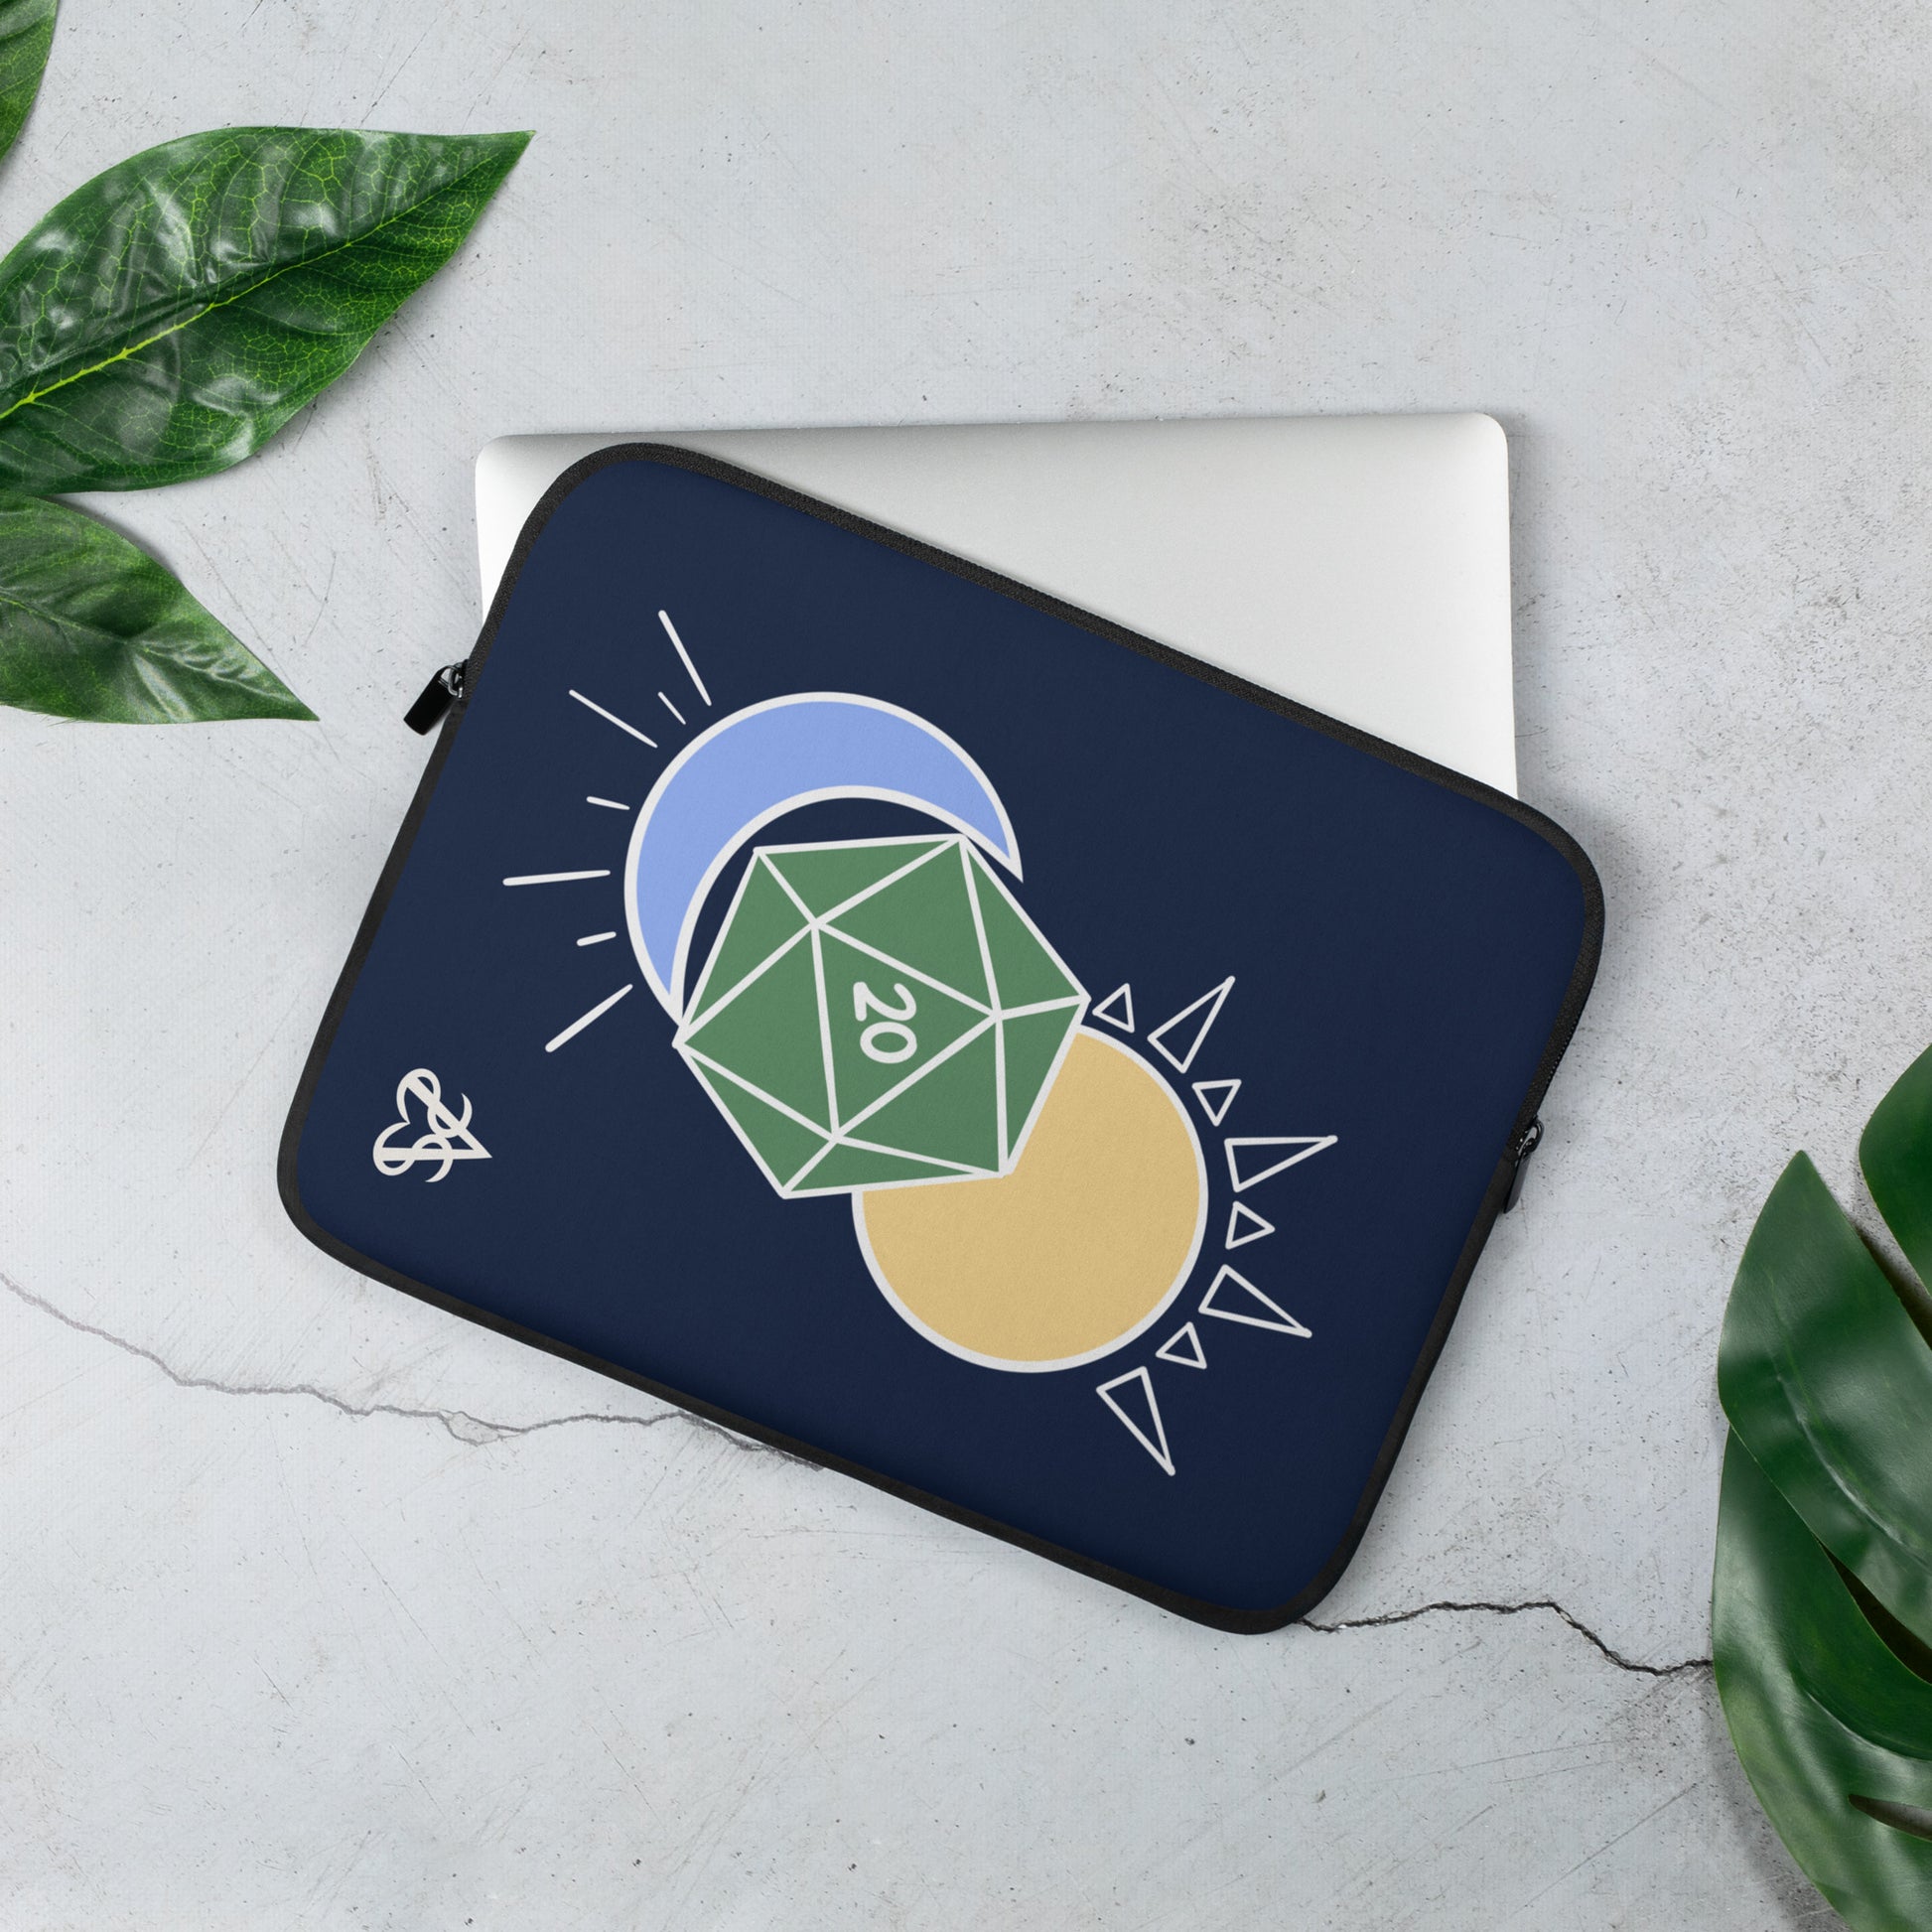 A laptop sleeve with an illustration of a D20 with a sun and moon on a midnight blue background.